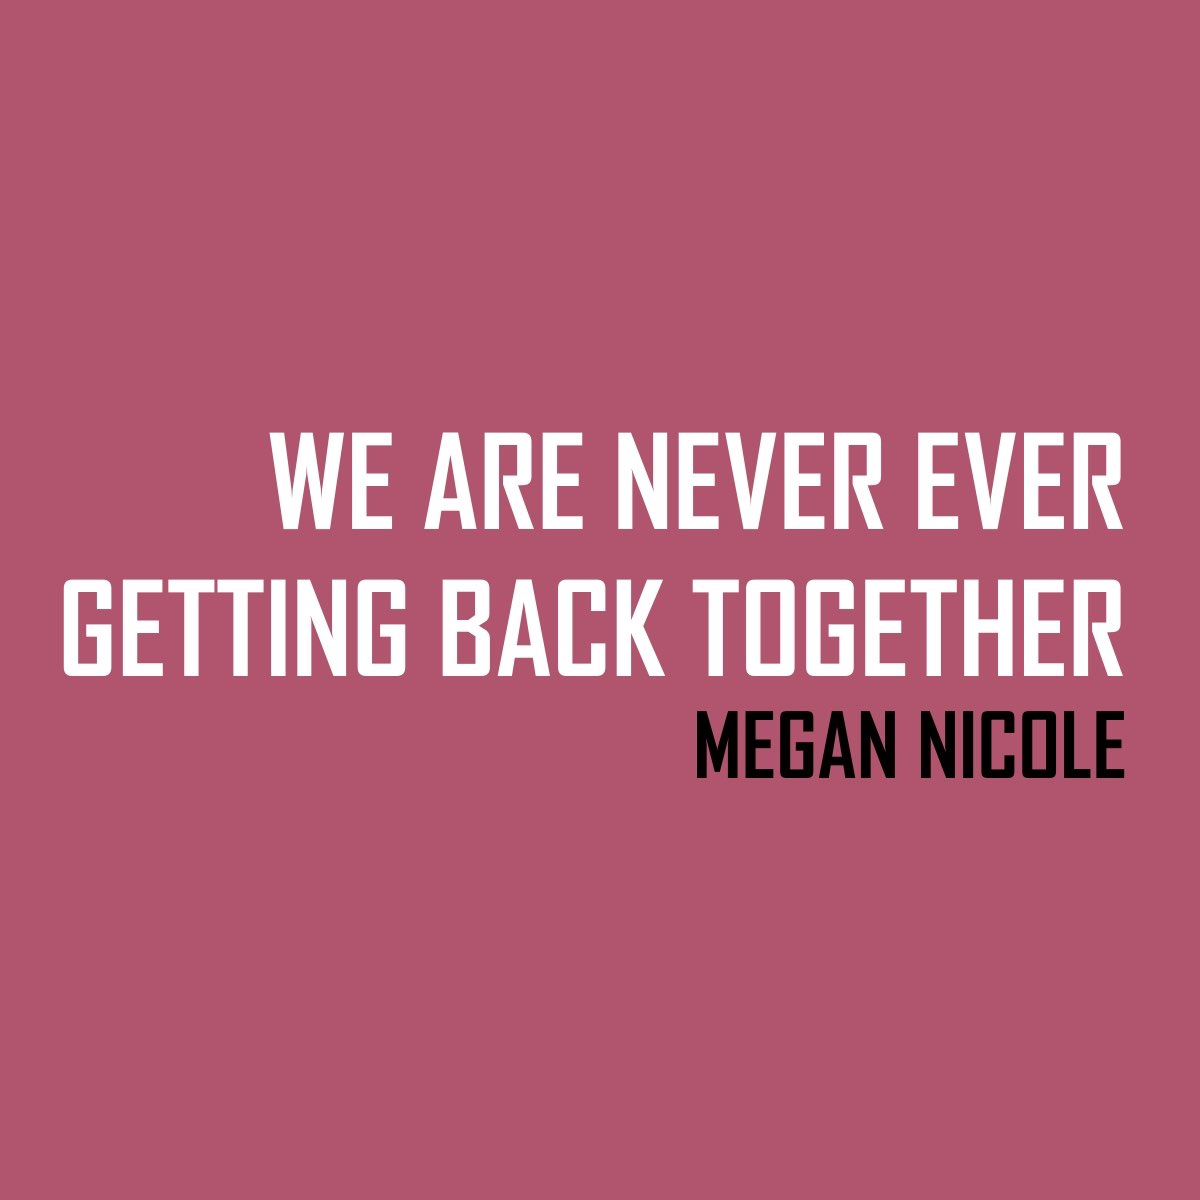 Getting back together. We are never ever getting back together. Песня we are never ever ever getting back together. Ever never. We are never ever getting back together gif.